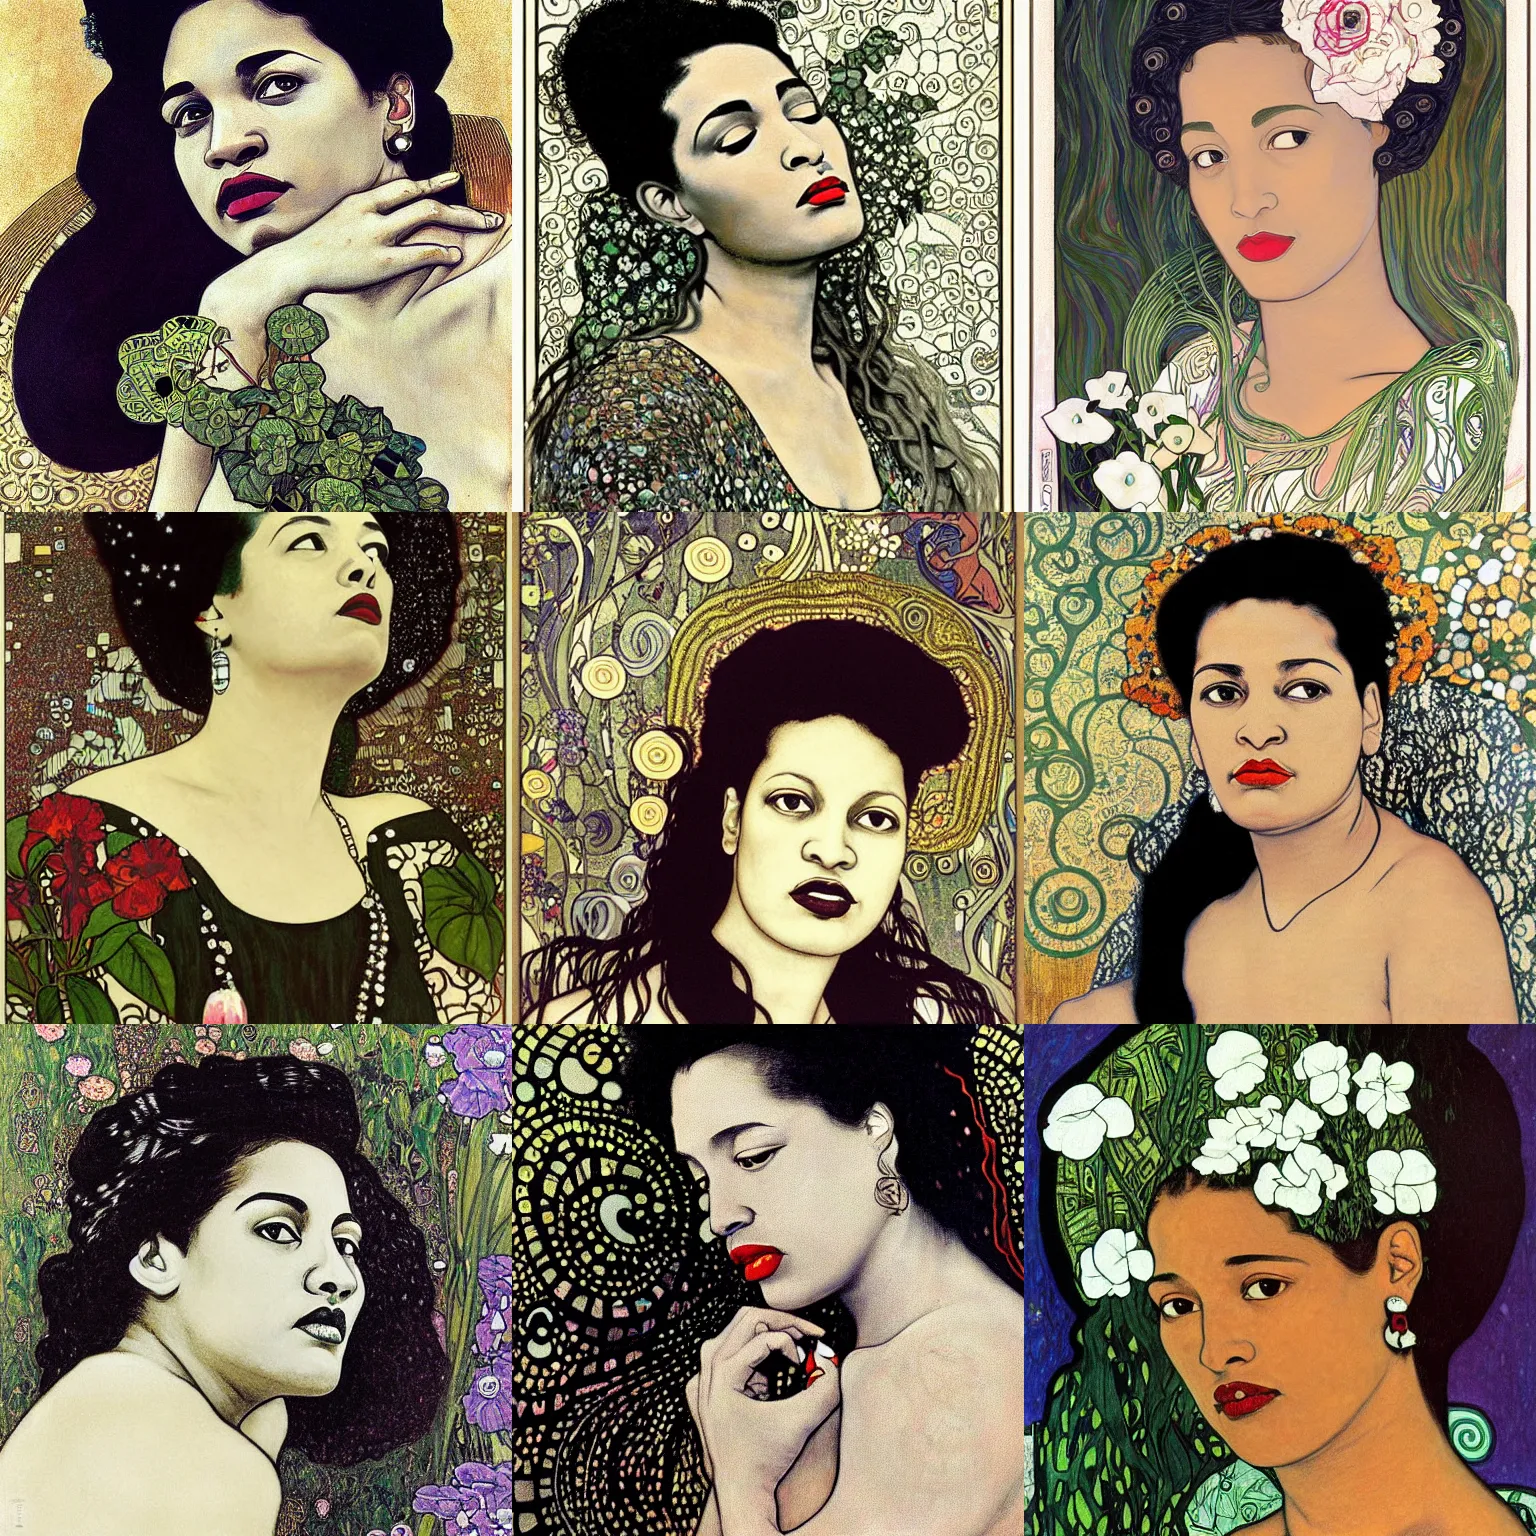 Prompt: Heart breaking portrait of billie holiday, large white gardenia in her hairs, billy holiday by gustav klimt and Alphonse Mucha in the style of art nouveau, melancholic, sad, minimalism, masterpiece